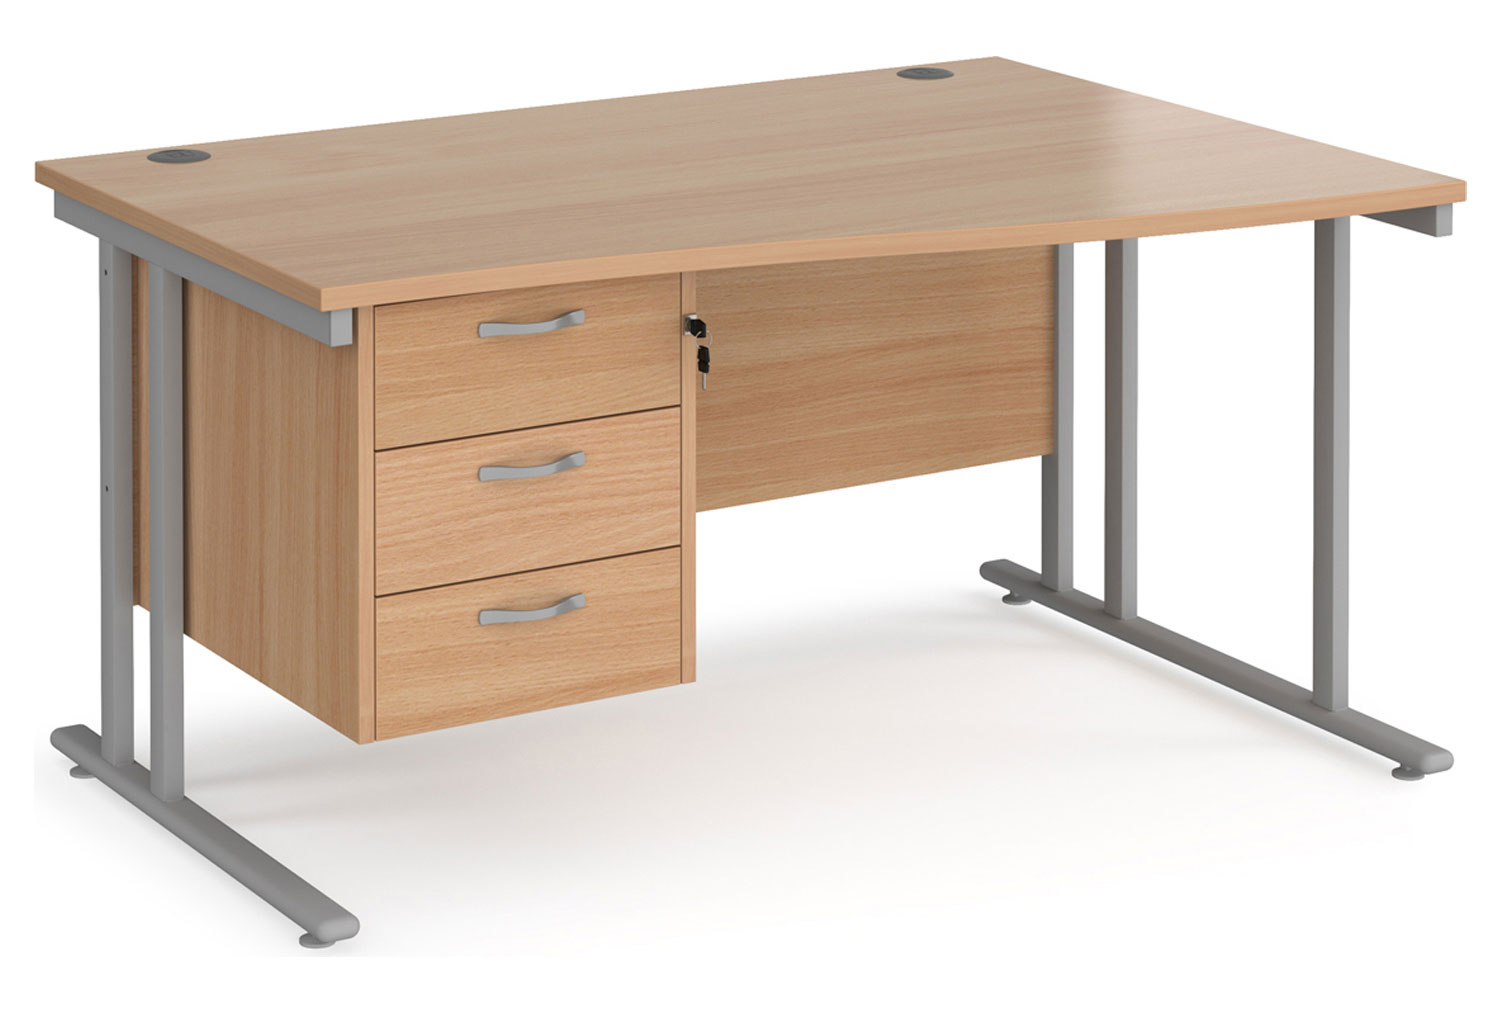 Value Line Deluxe C-Leg Right Hand Wave Office Desk 3 Drawers (Silver Legs), 140wx99/80dx73h (cm), Beech